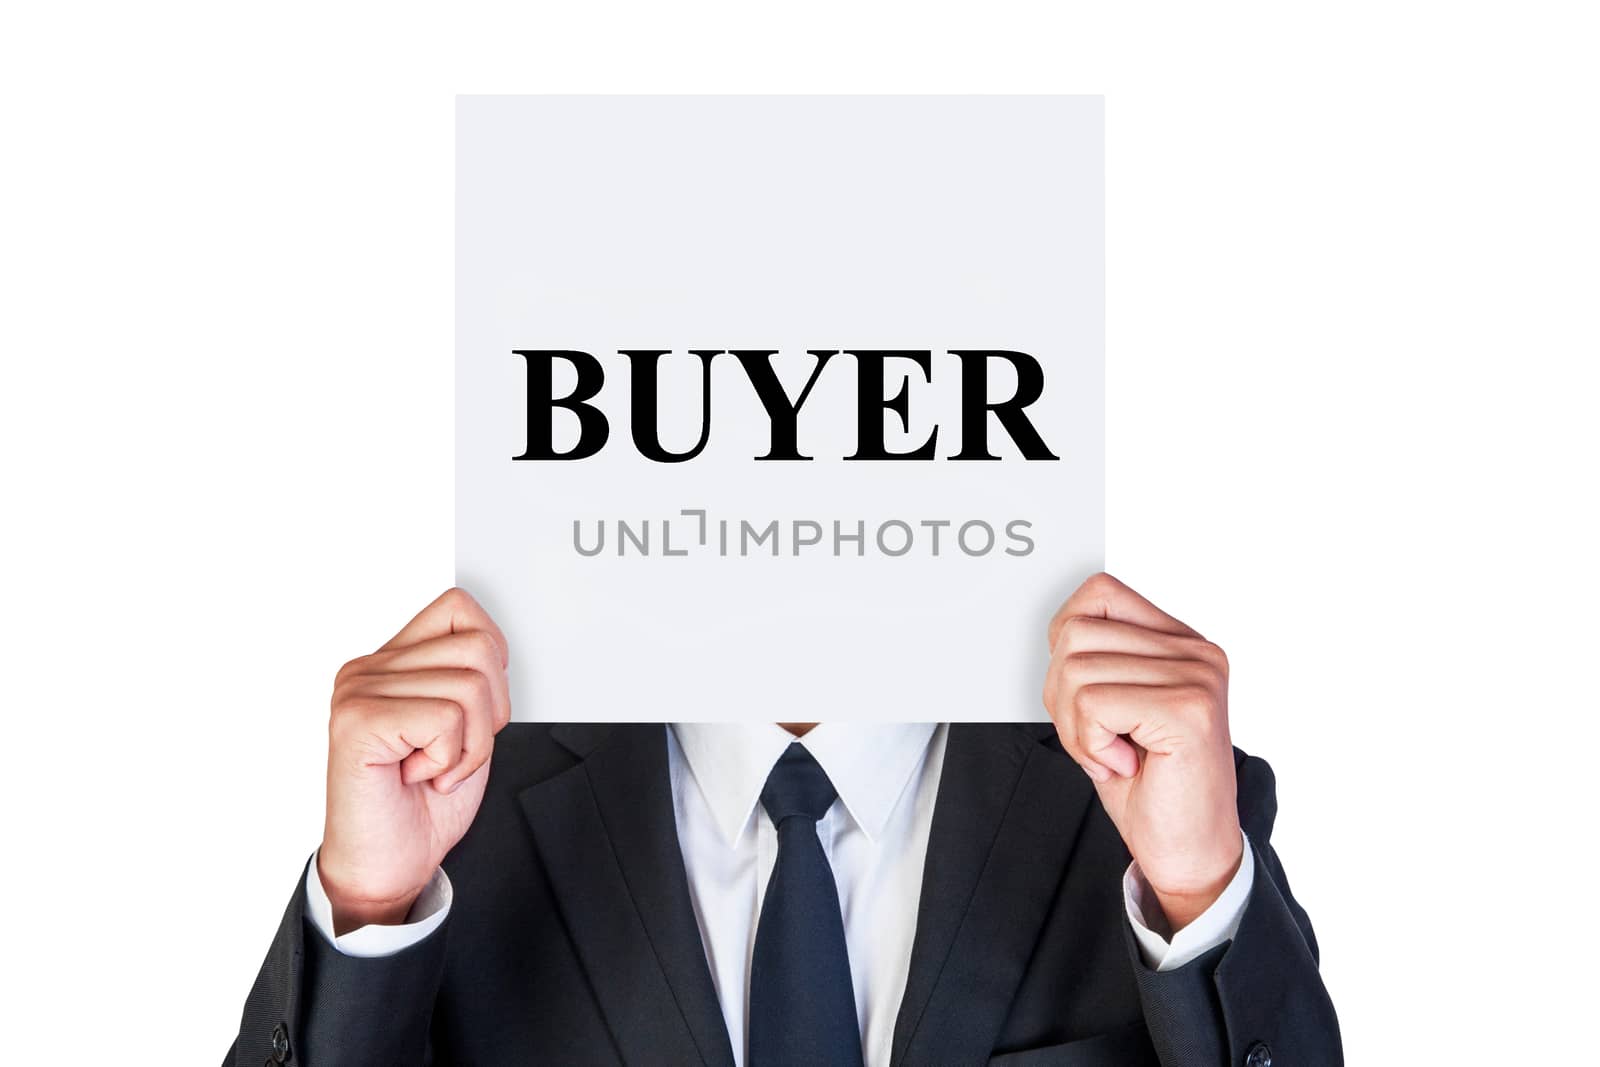 Say buyer word shown by business person isolated on white background